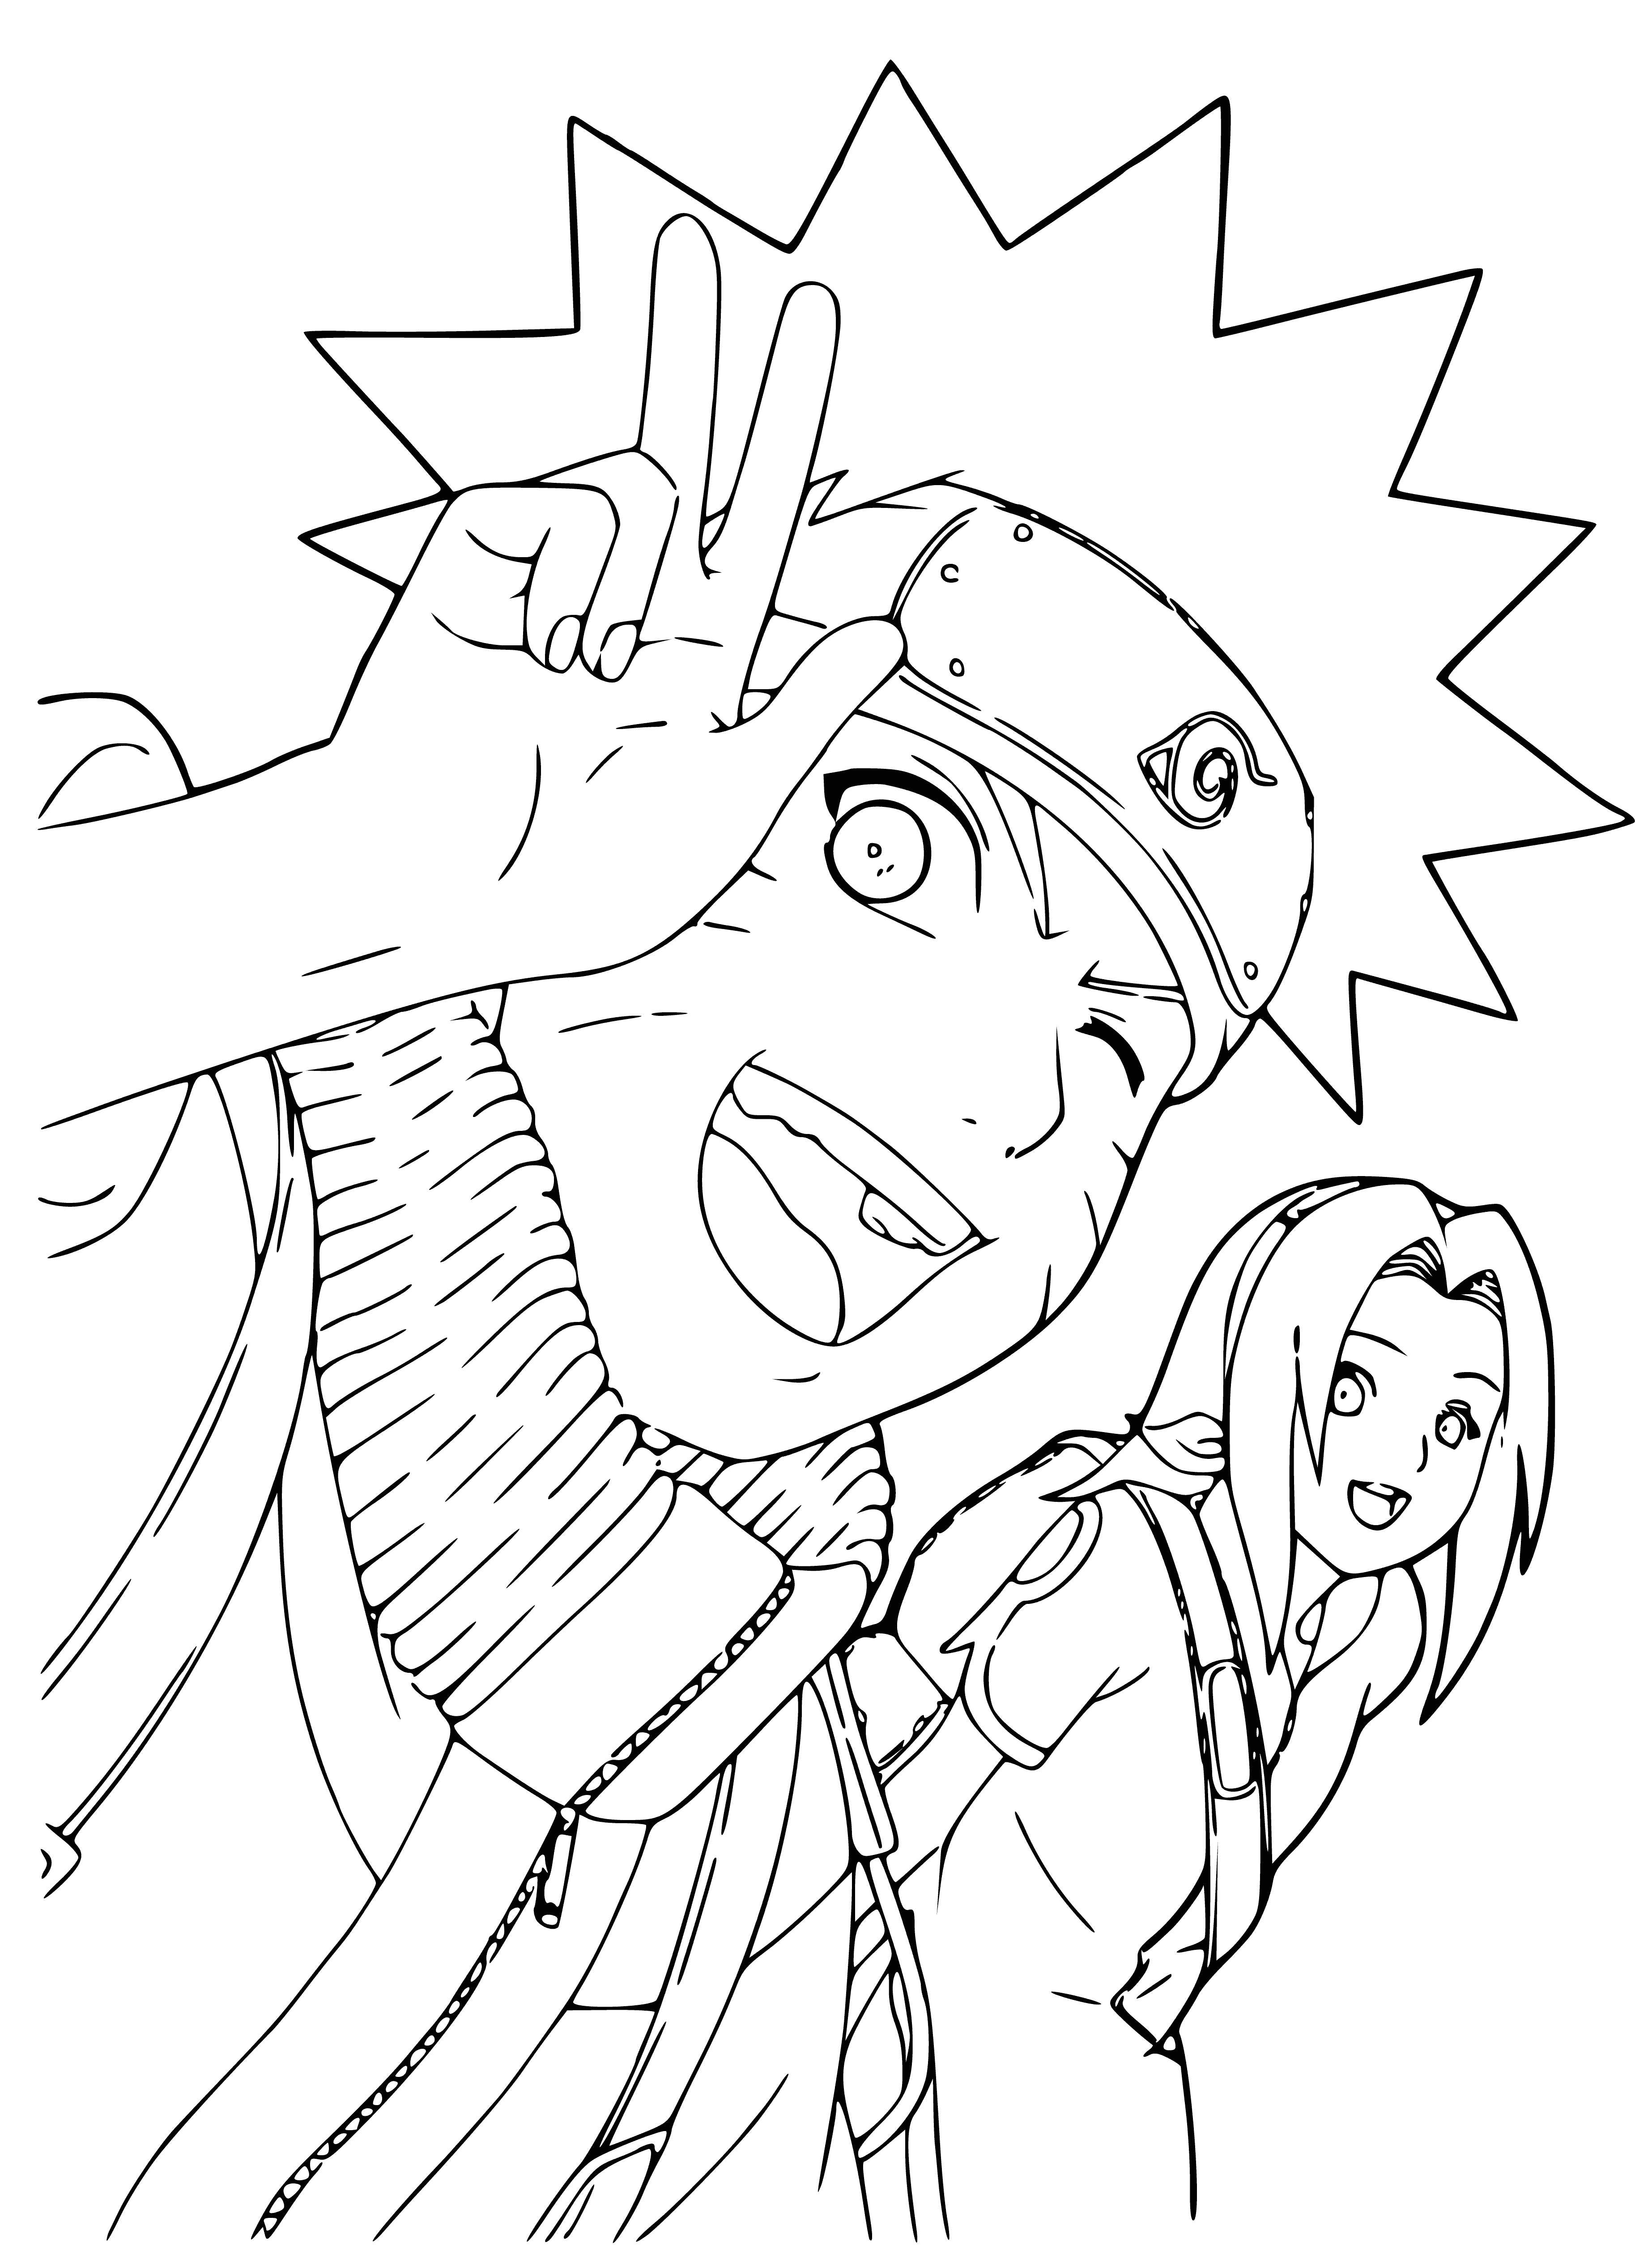 coloring page: Naruto and Sakura smile at each other on a bridge, Sakura blushing, hands behind her back, Naruto with hands in pockets.